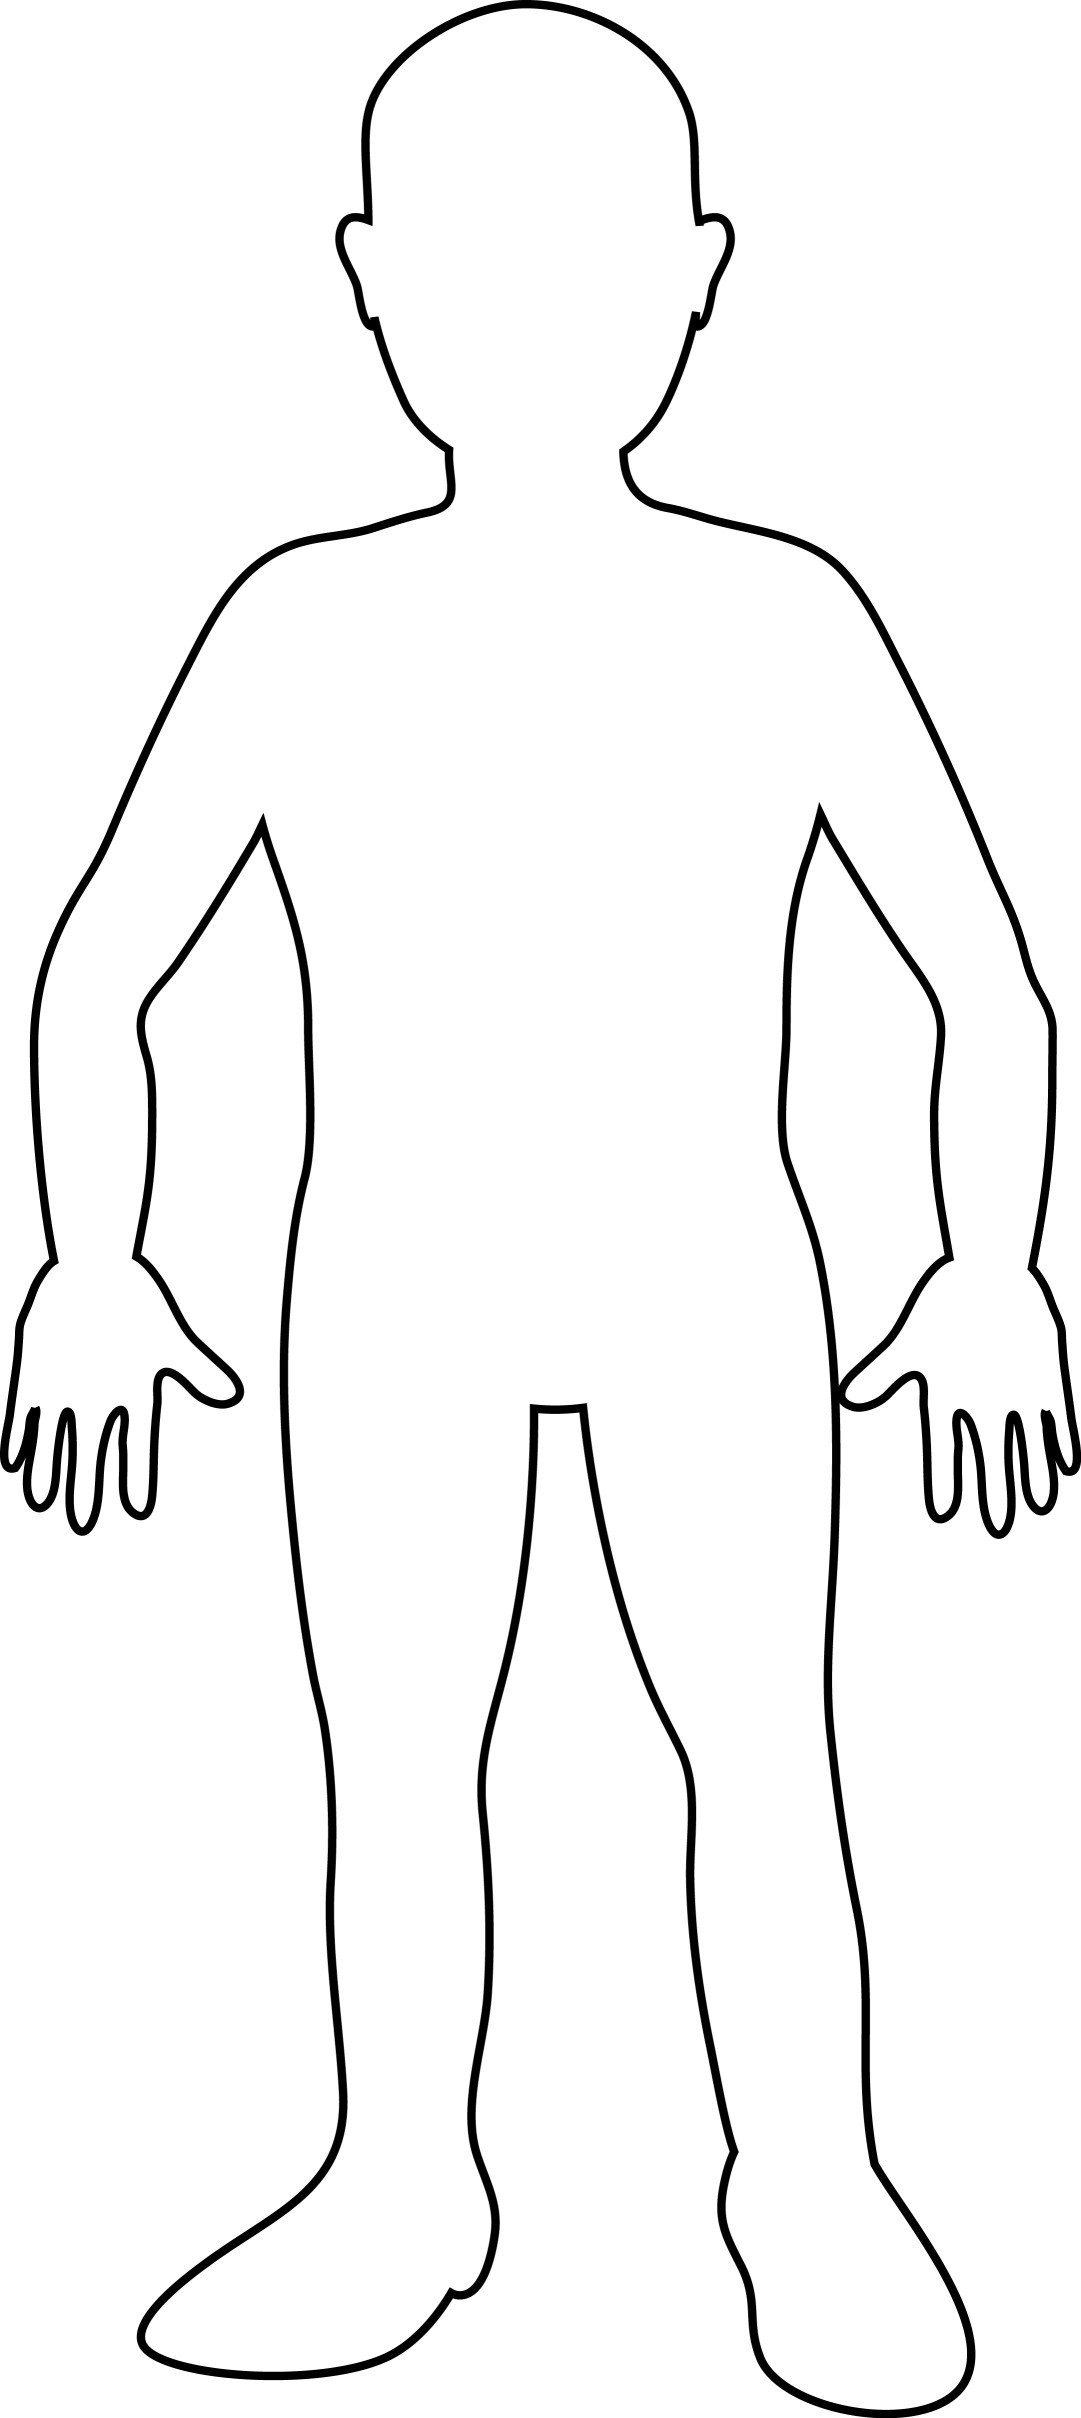 Free Blank Person Template, Download Free Clip Art, Free Clip Art On - Free Printable Human Body Template